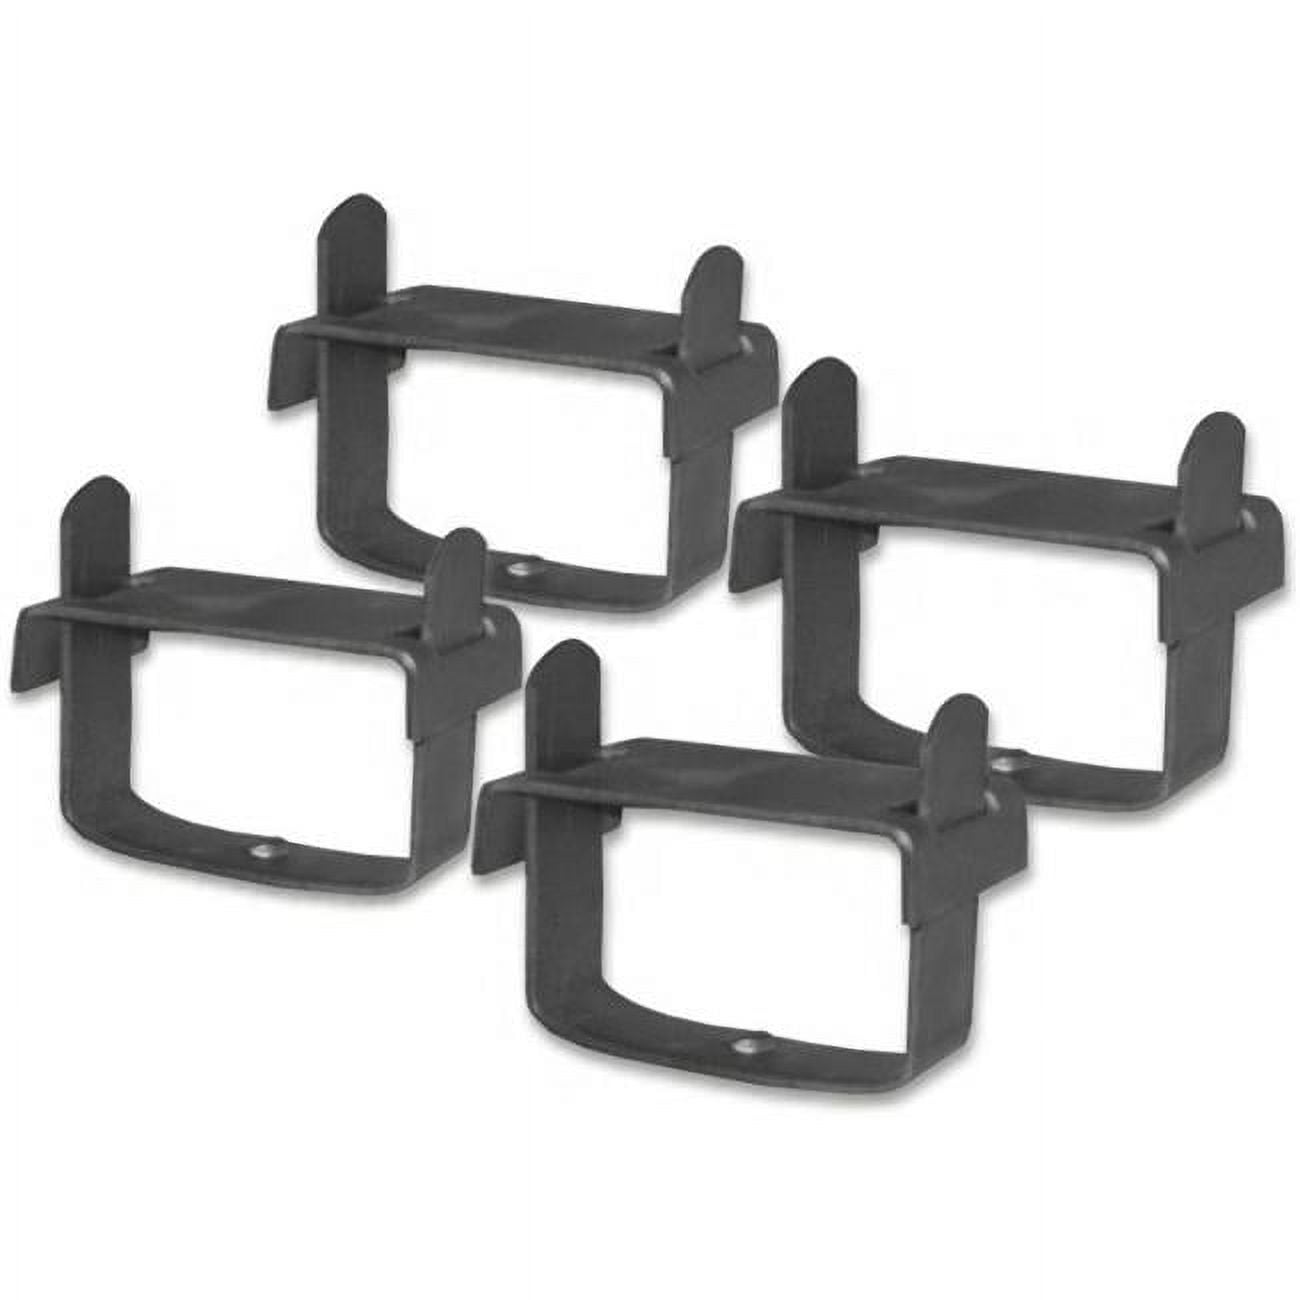 Picture of Billet4X4 LSC134 1.75 in. Axle Leaf Spring Clamps - 4X4 Off-Road Vehicles - Set of 4